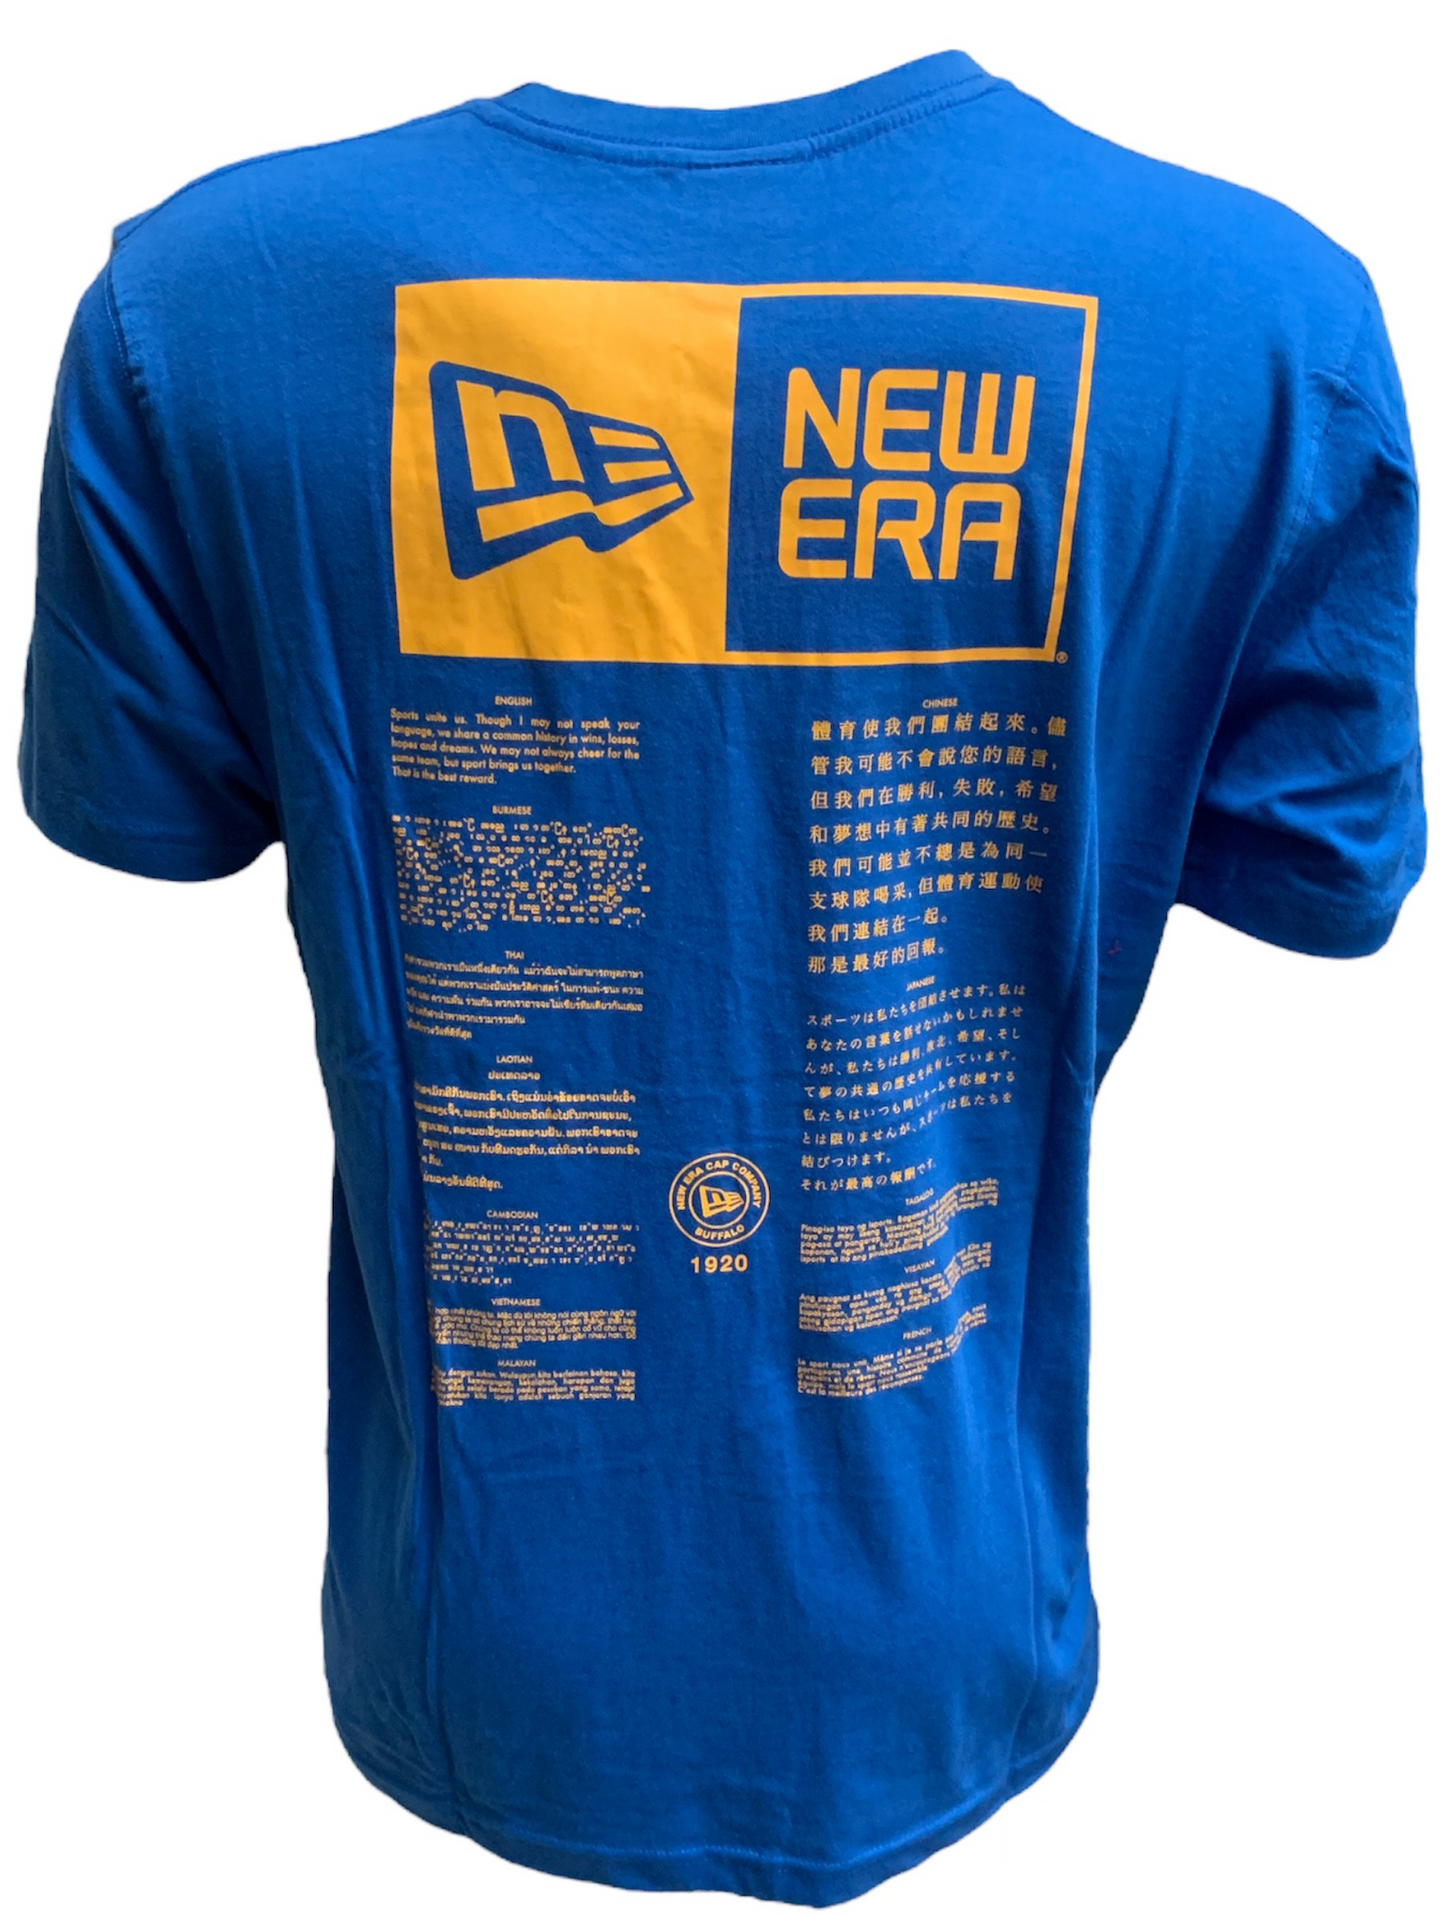 LOS ANGELES CHARGERS MEN'S ALPHA INDUSTRIES TEE